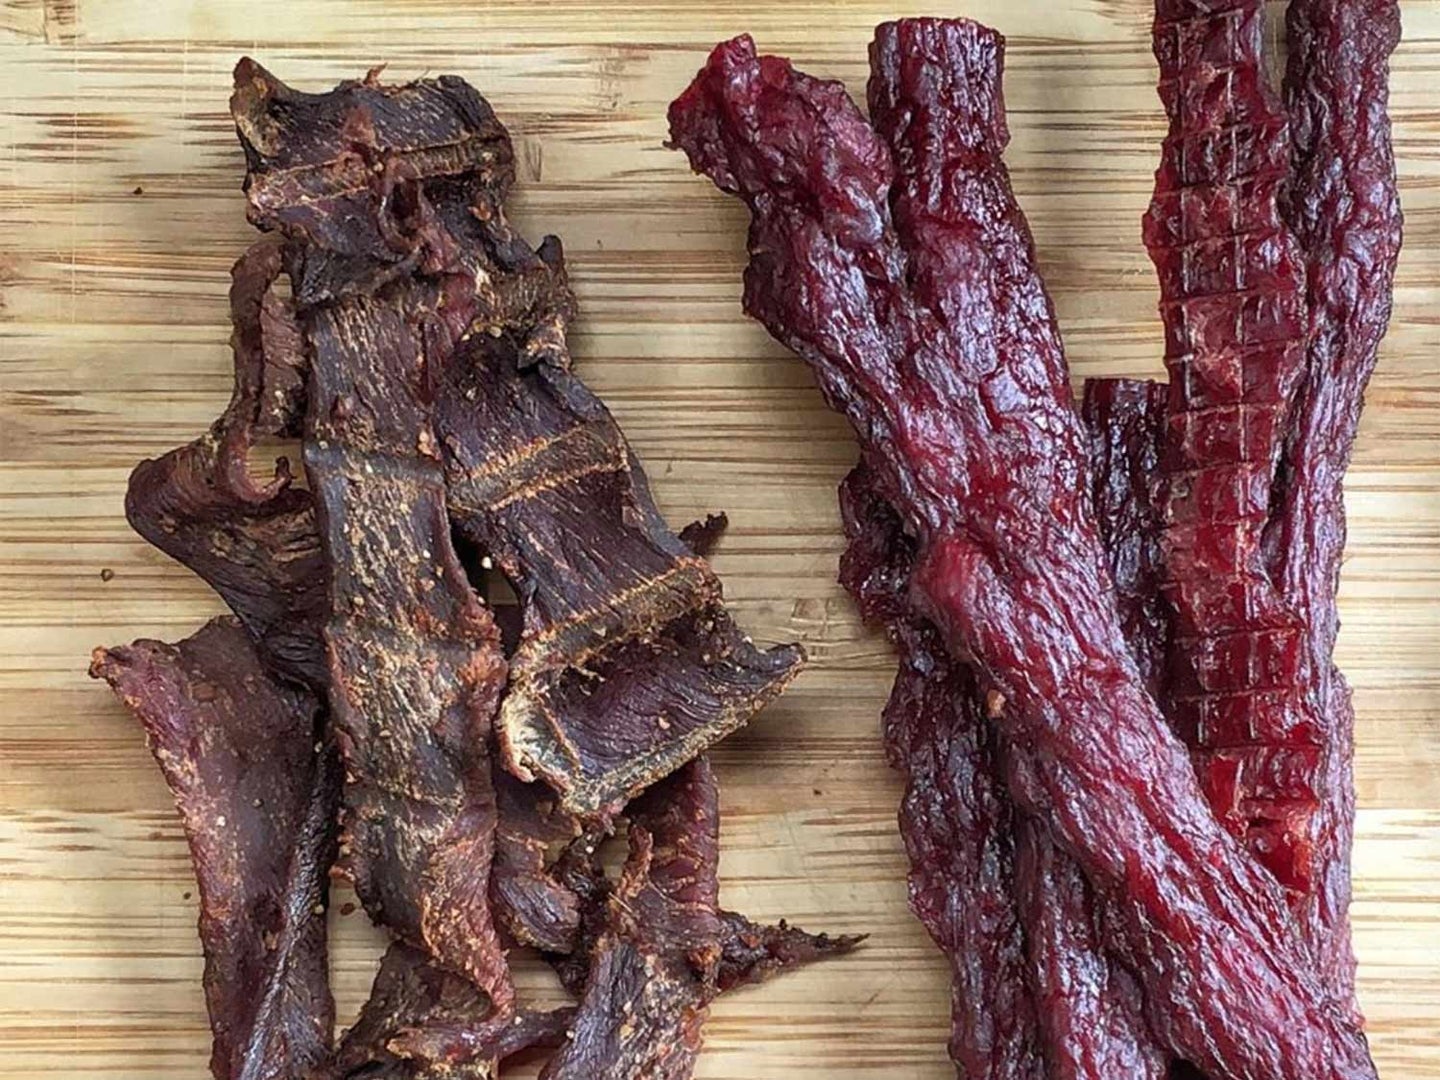 The Ultimate Guide to Making Wild Game Jerky | Field & Stream